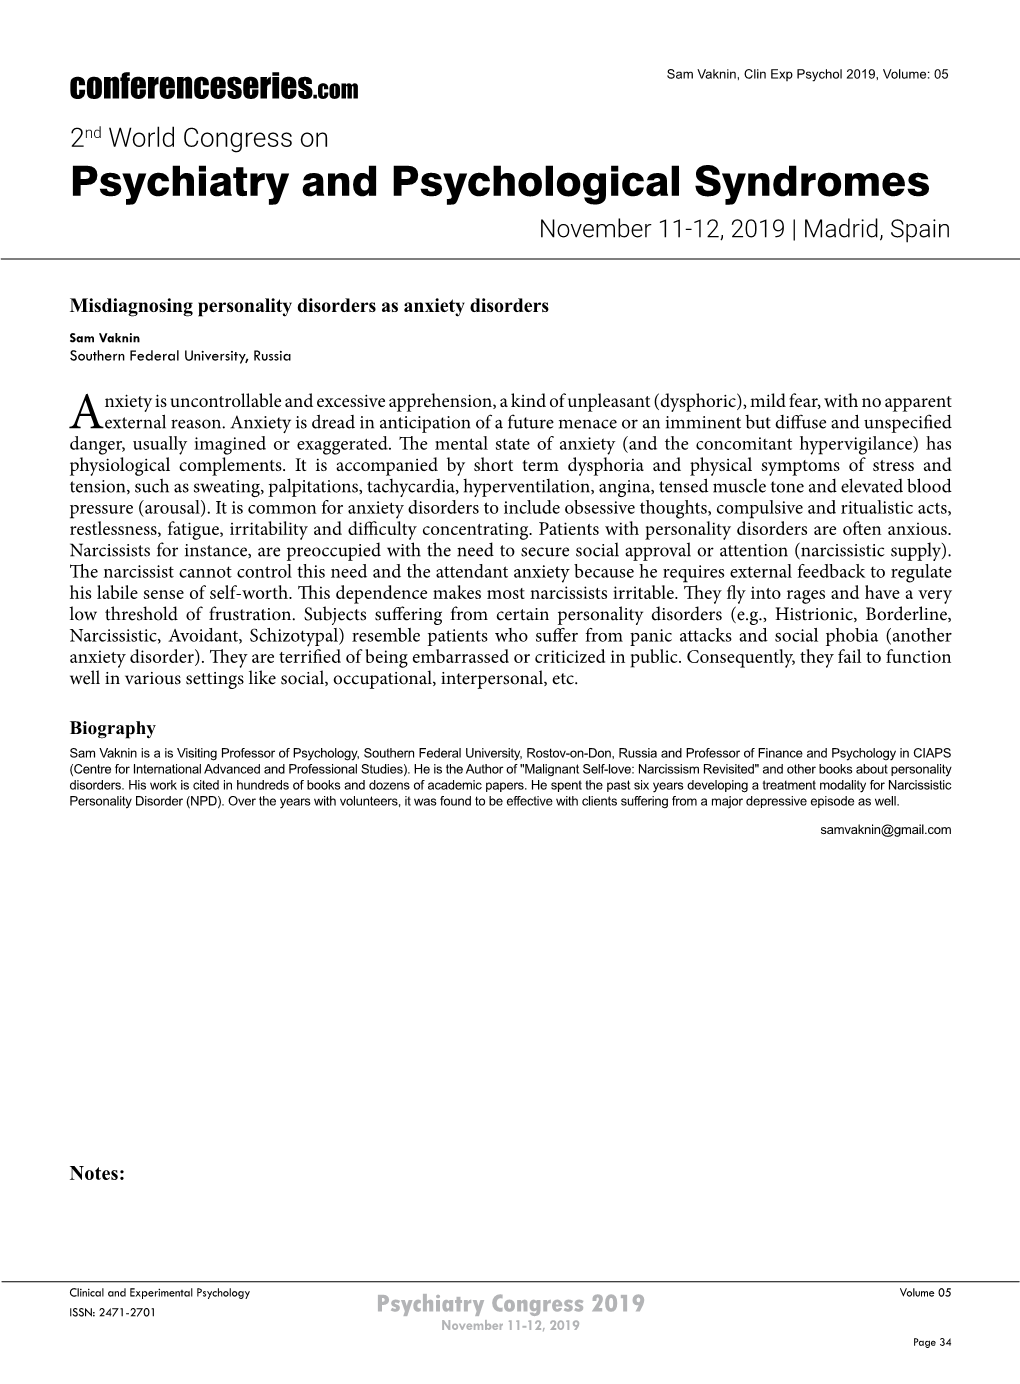 Psychiatry and Psychological Syndromes November 11-12, 2019 | Madrid, Spain